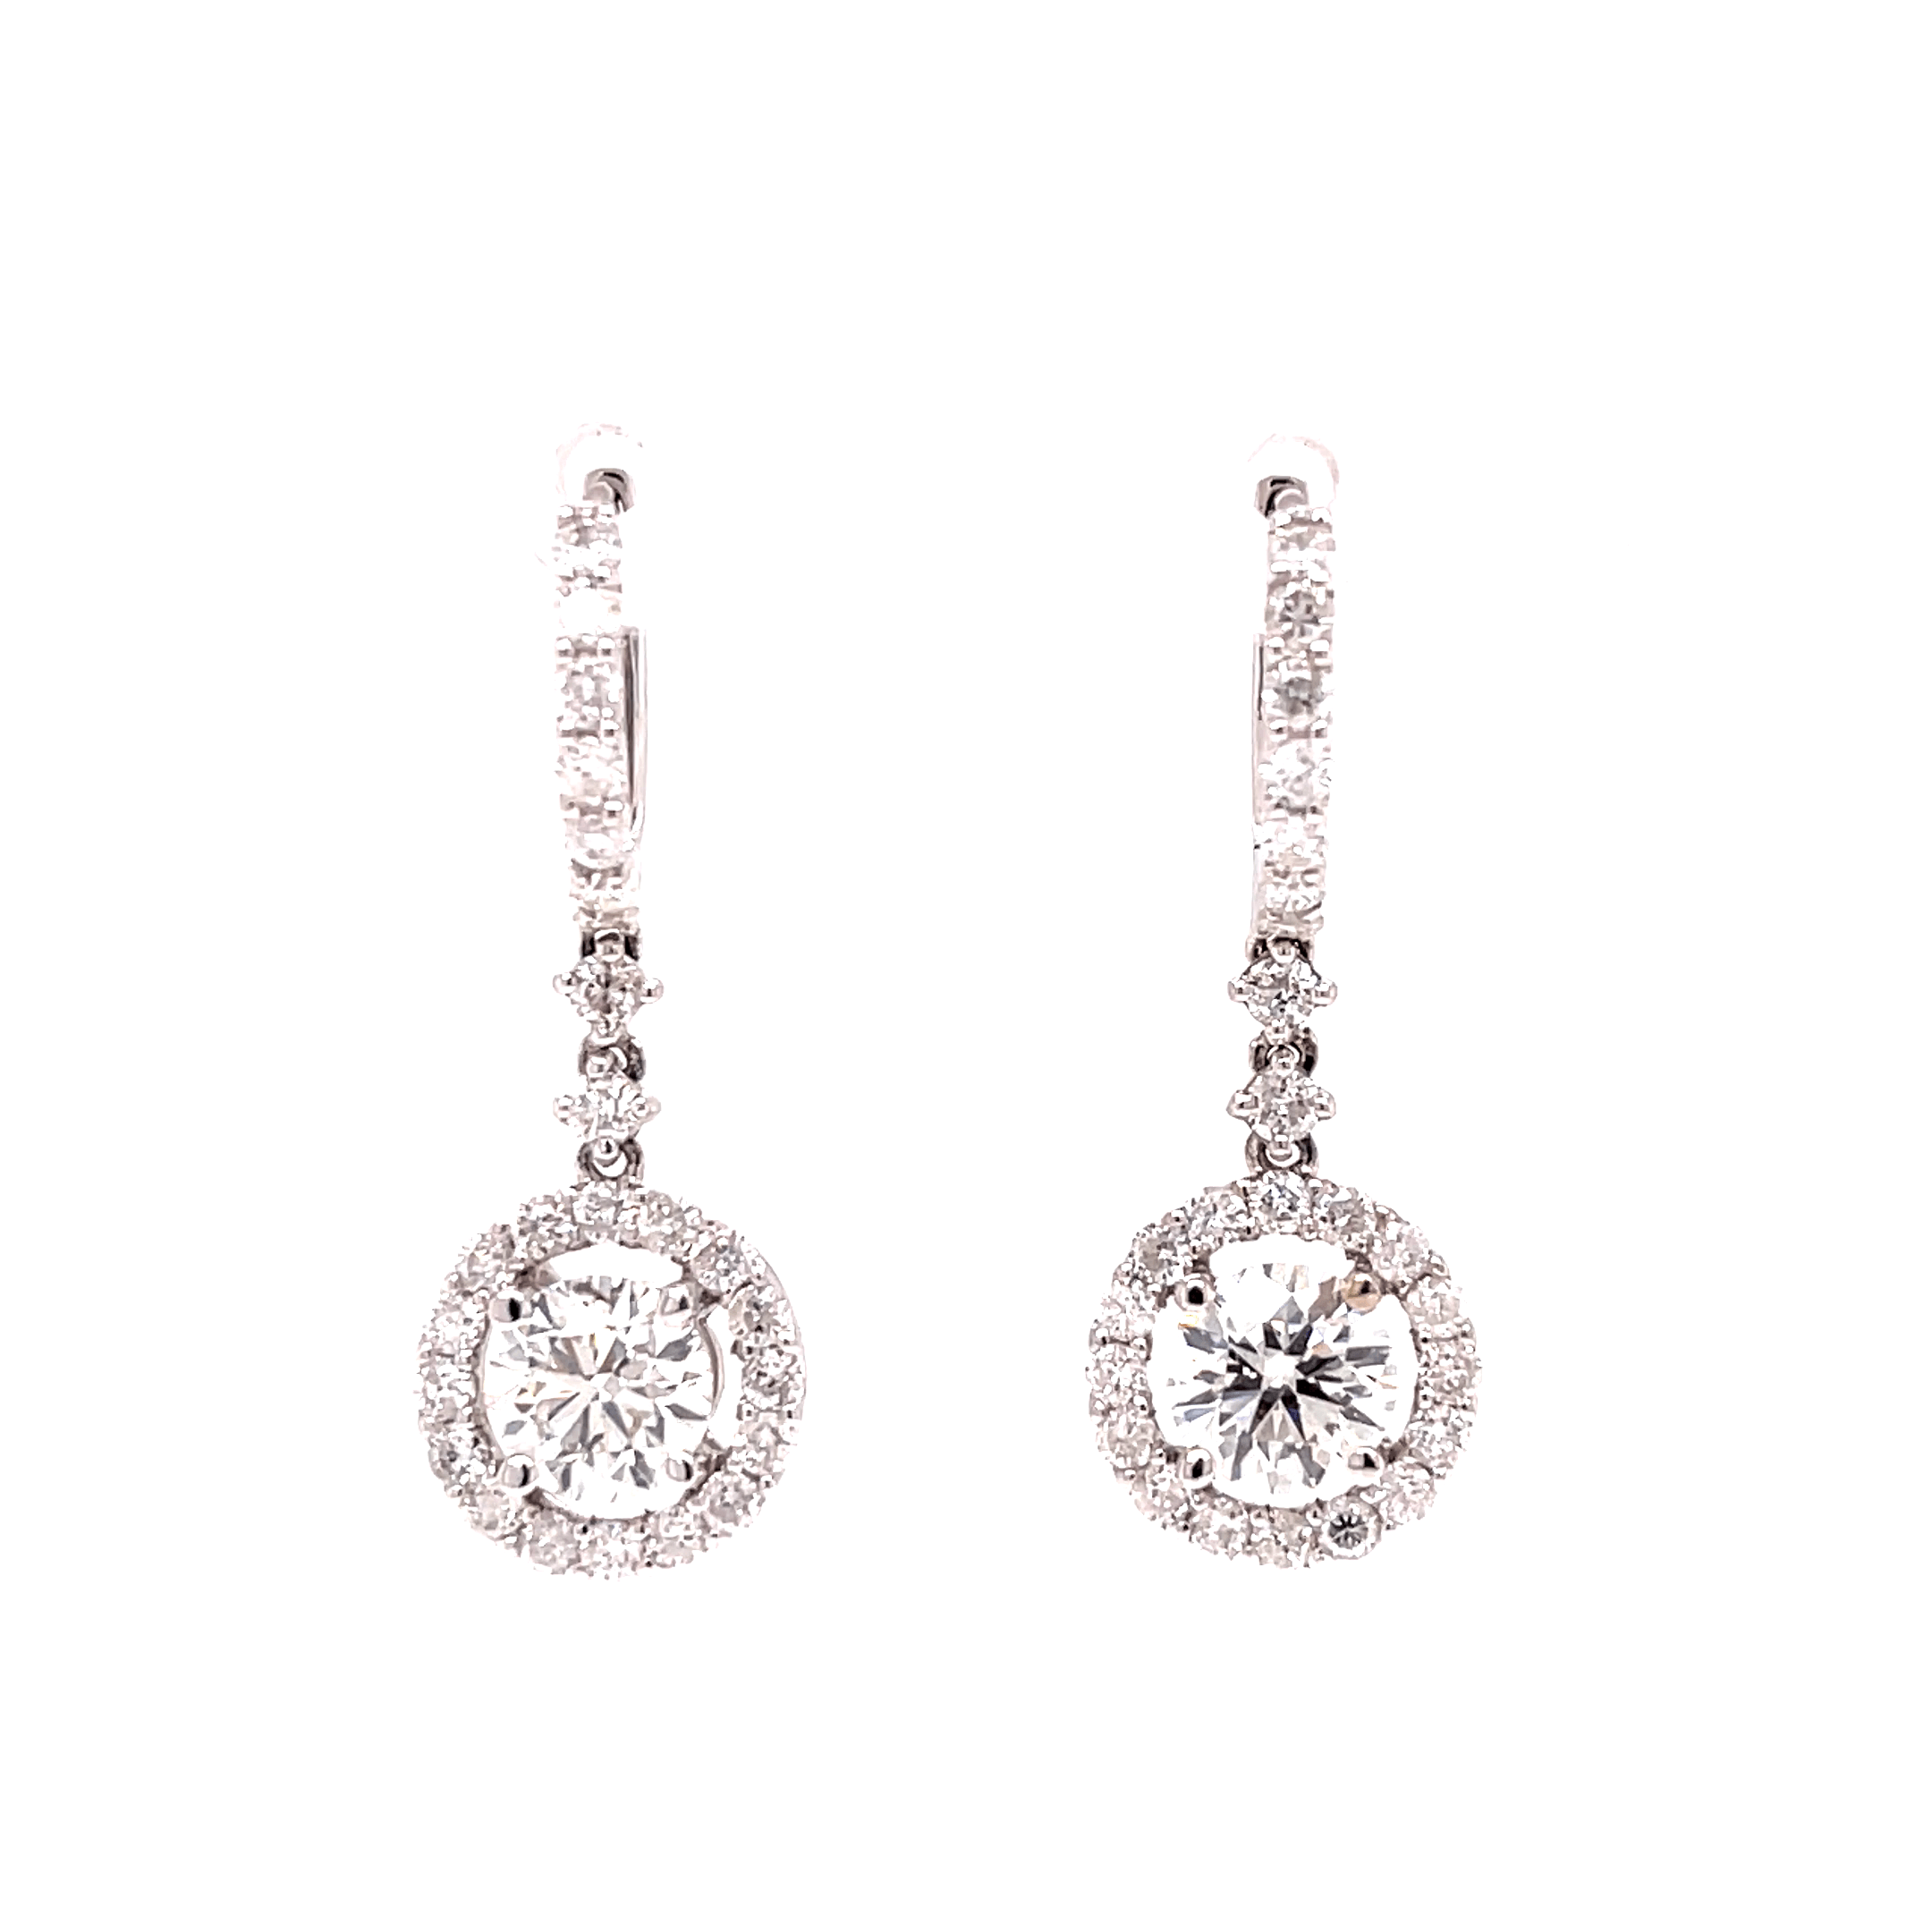 White Gold Diamond Dangle Fashion Earrings with Clip Back style clasp and Halo Dangle With Large Center Diamonds.